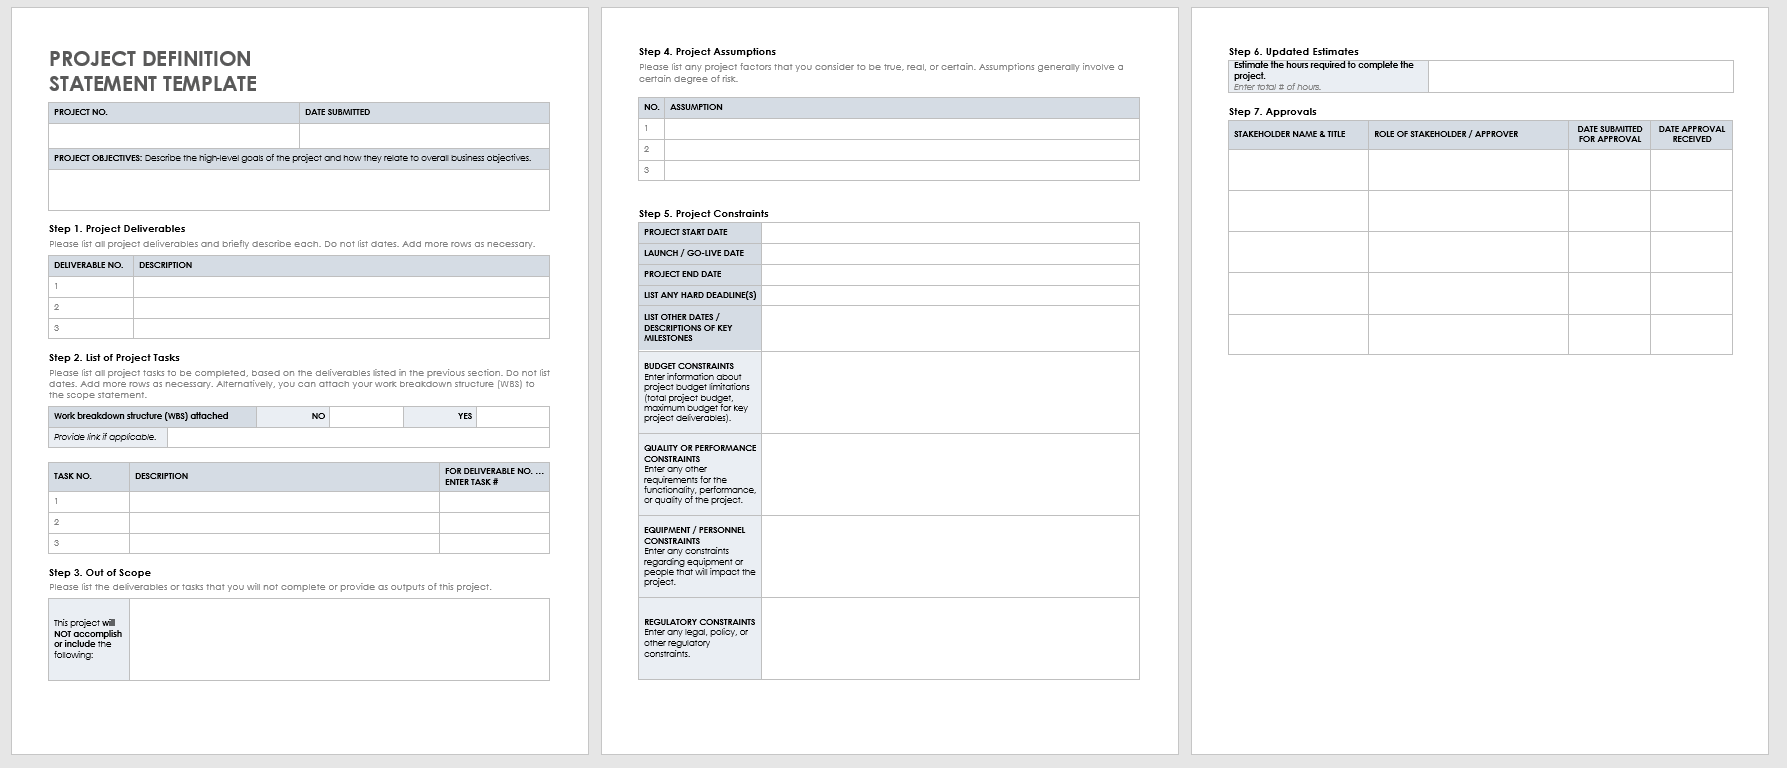 Project Definition Statement Template